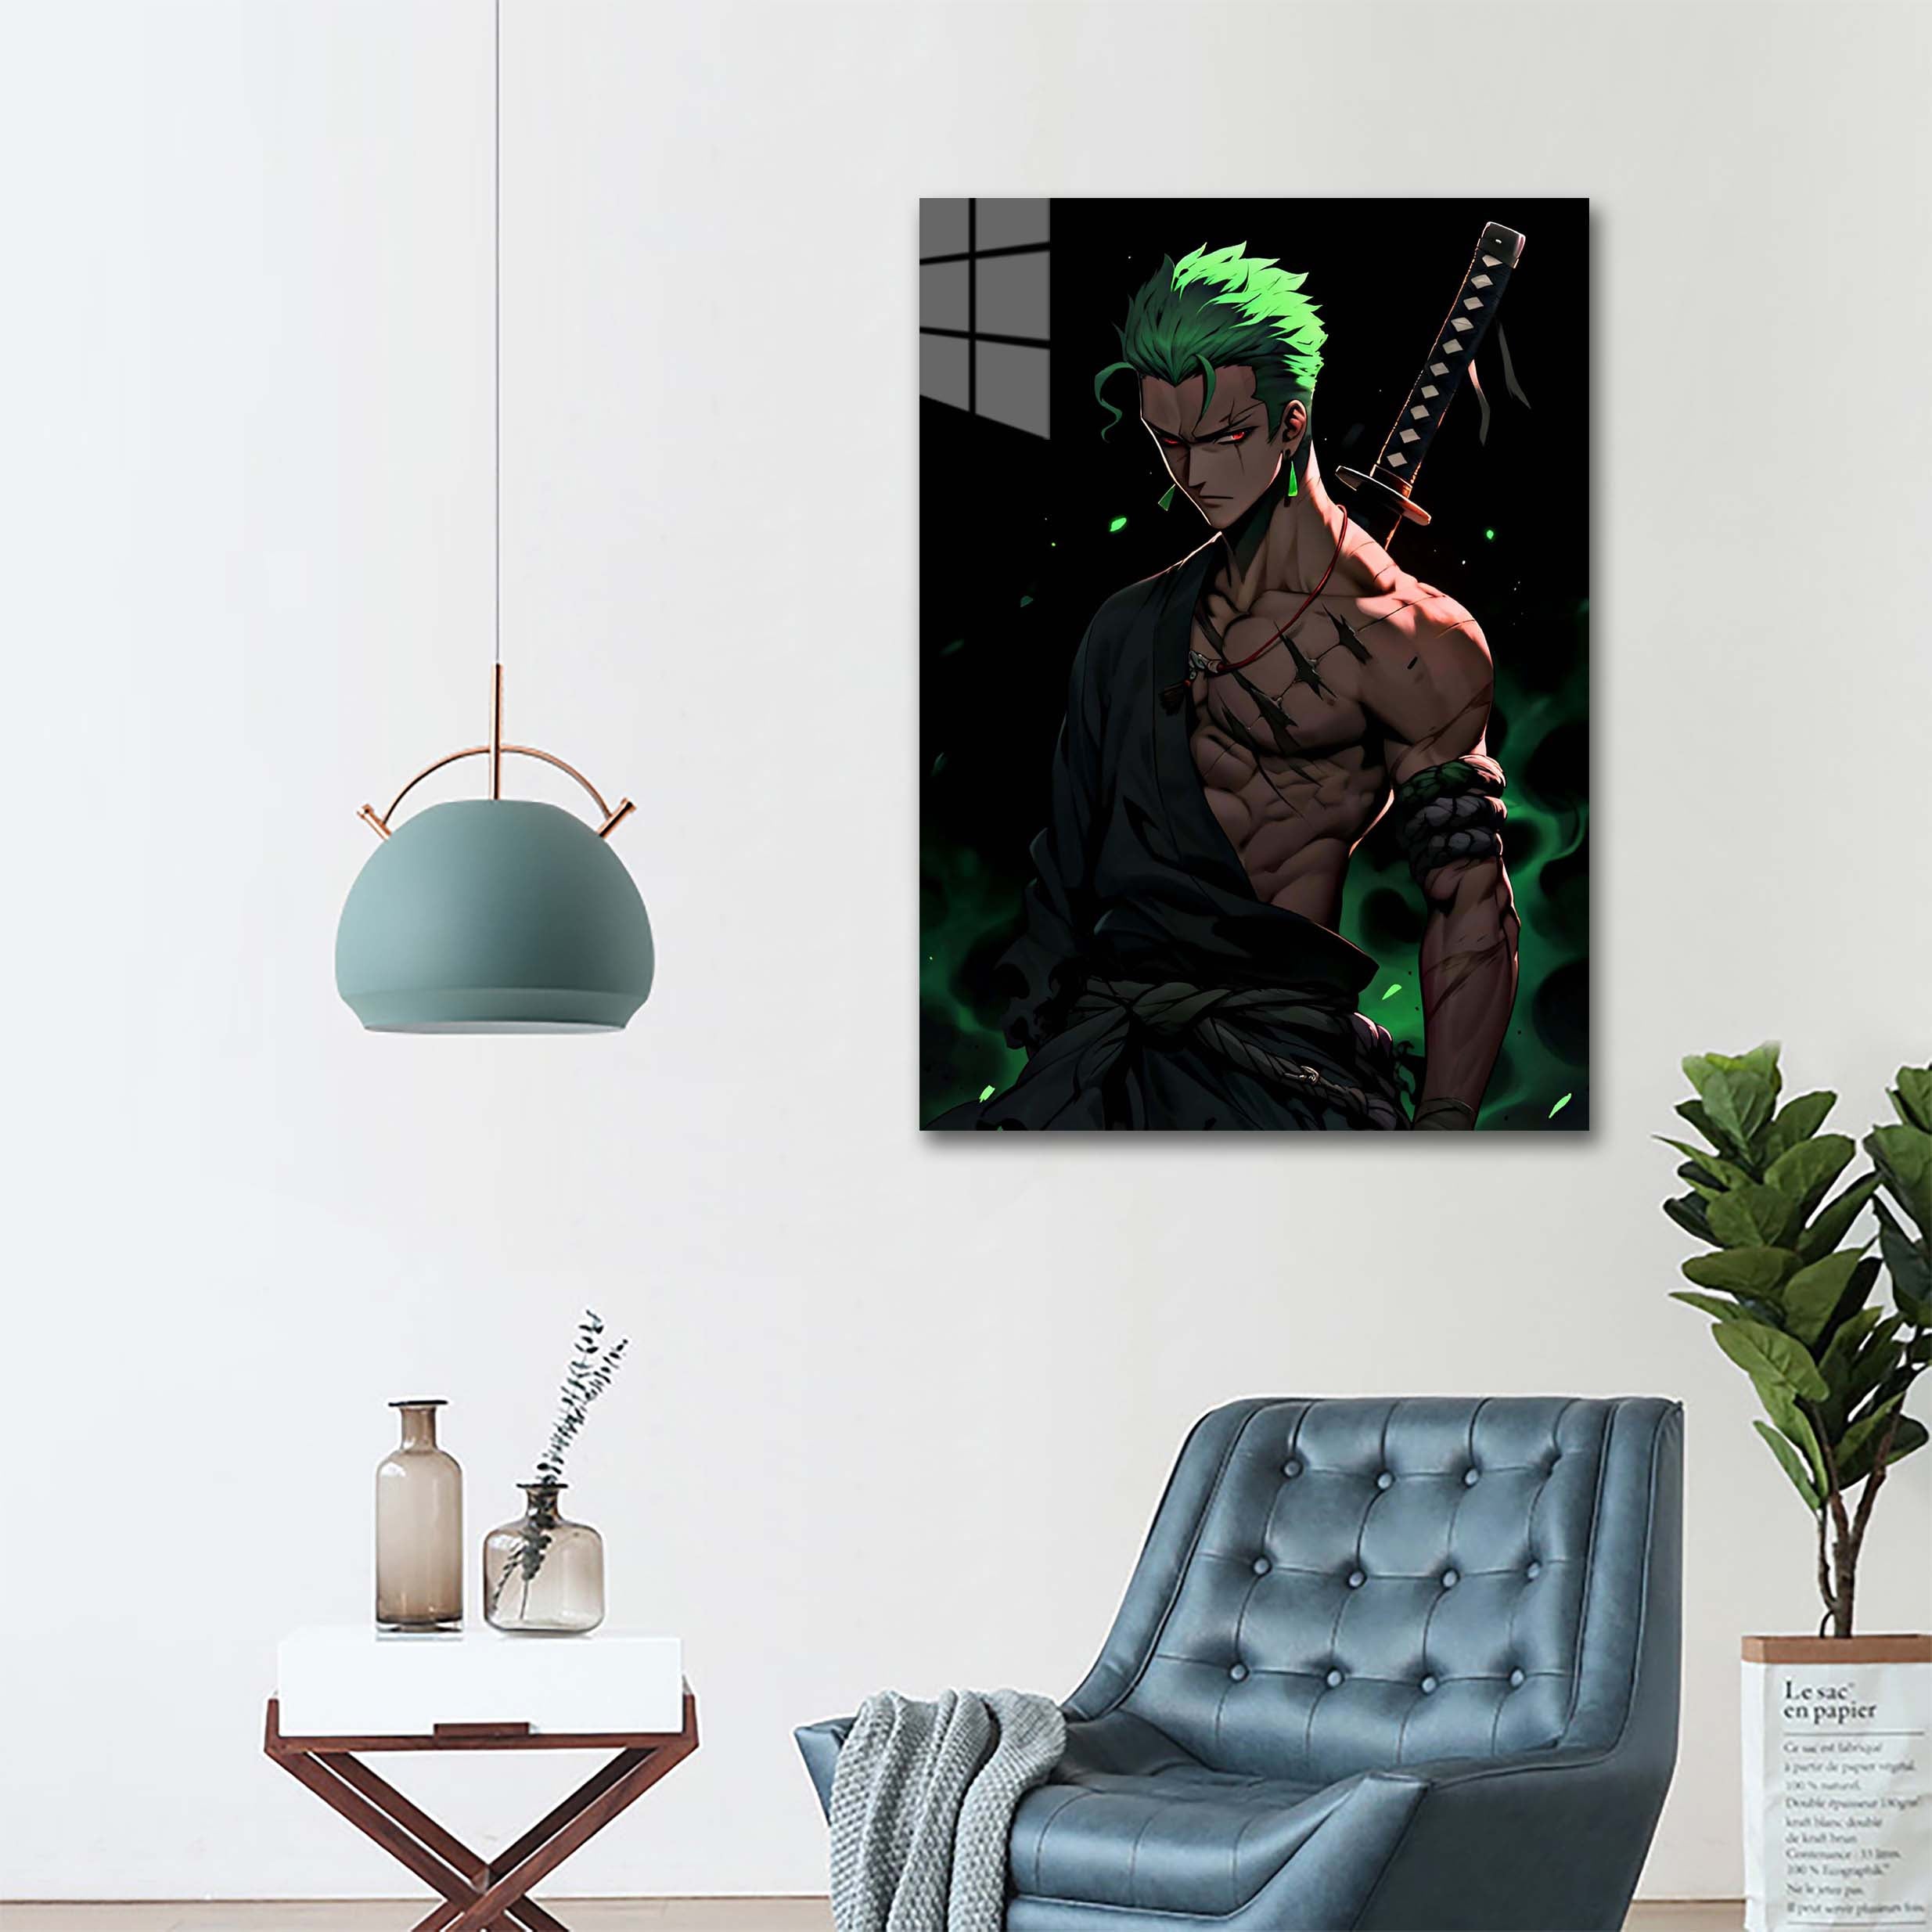 Roronoa Zoro from One piece anime-designed by @Vid_M@tion